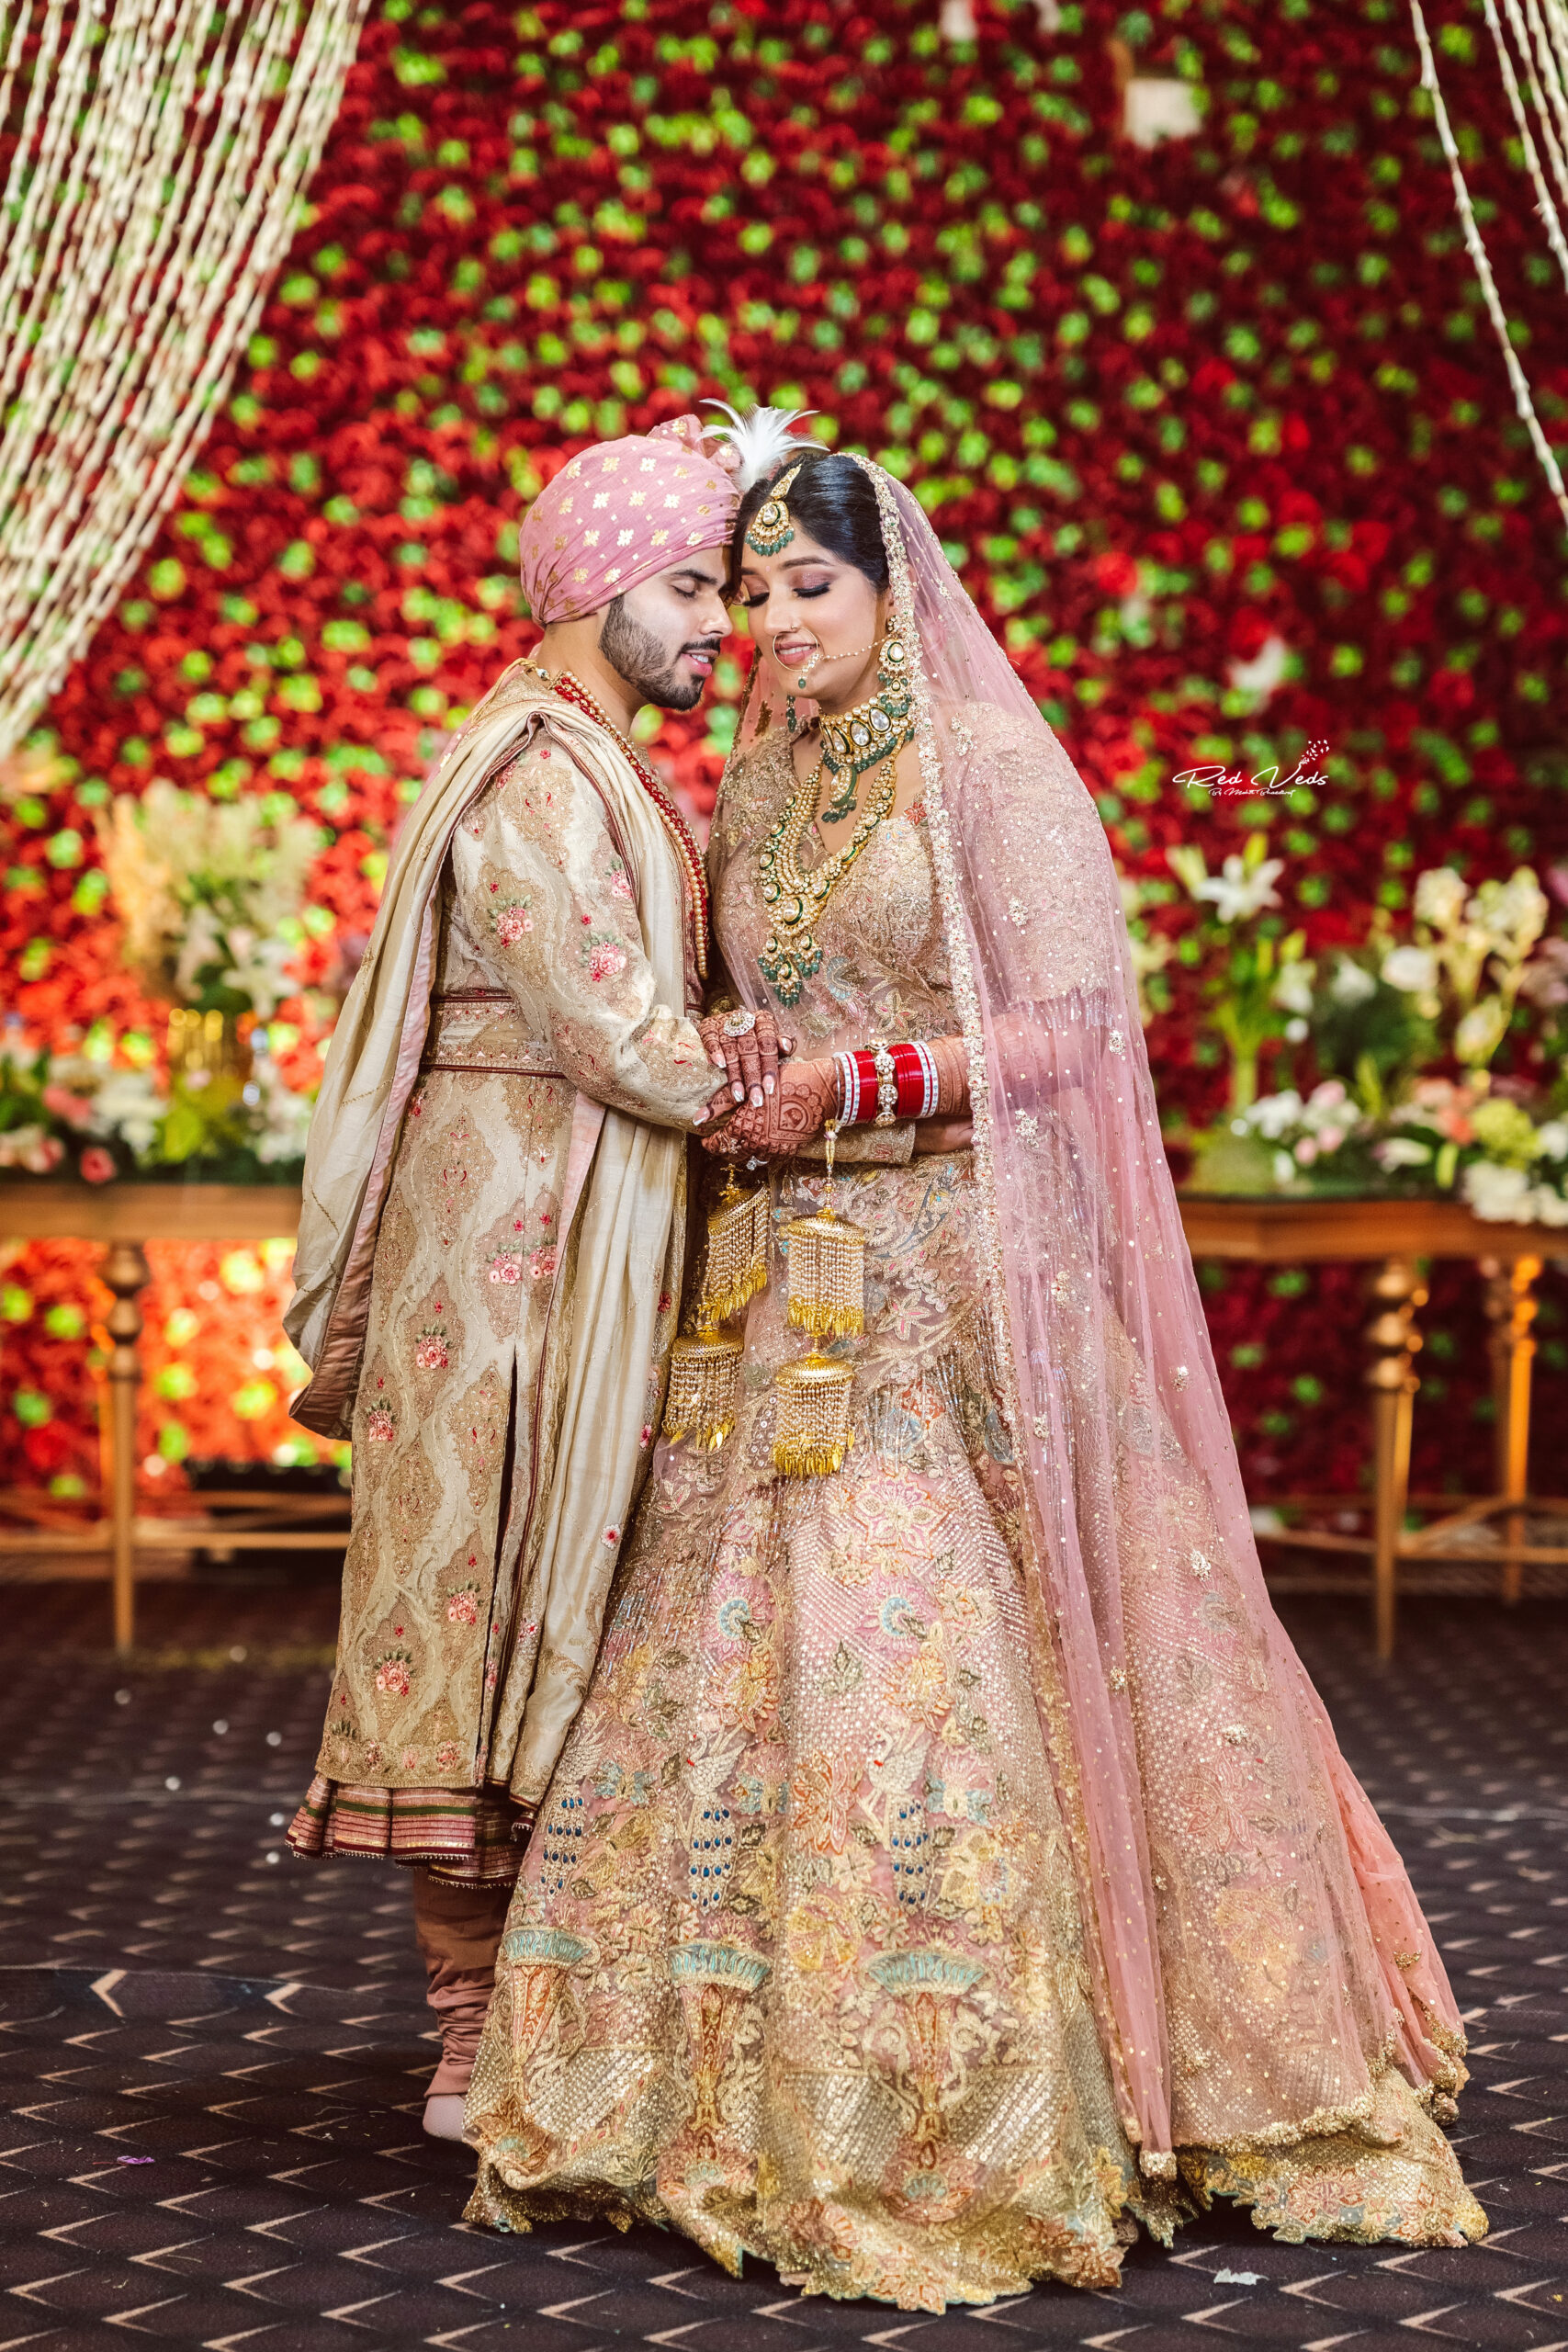 Indian Wedding Couple Portrait Photos and Images & Pictures | Shutterstock